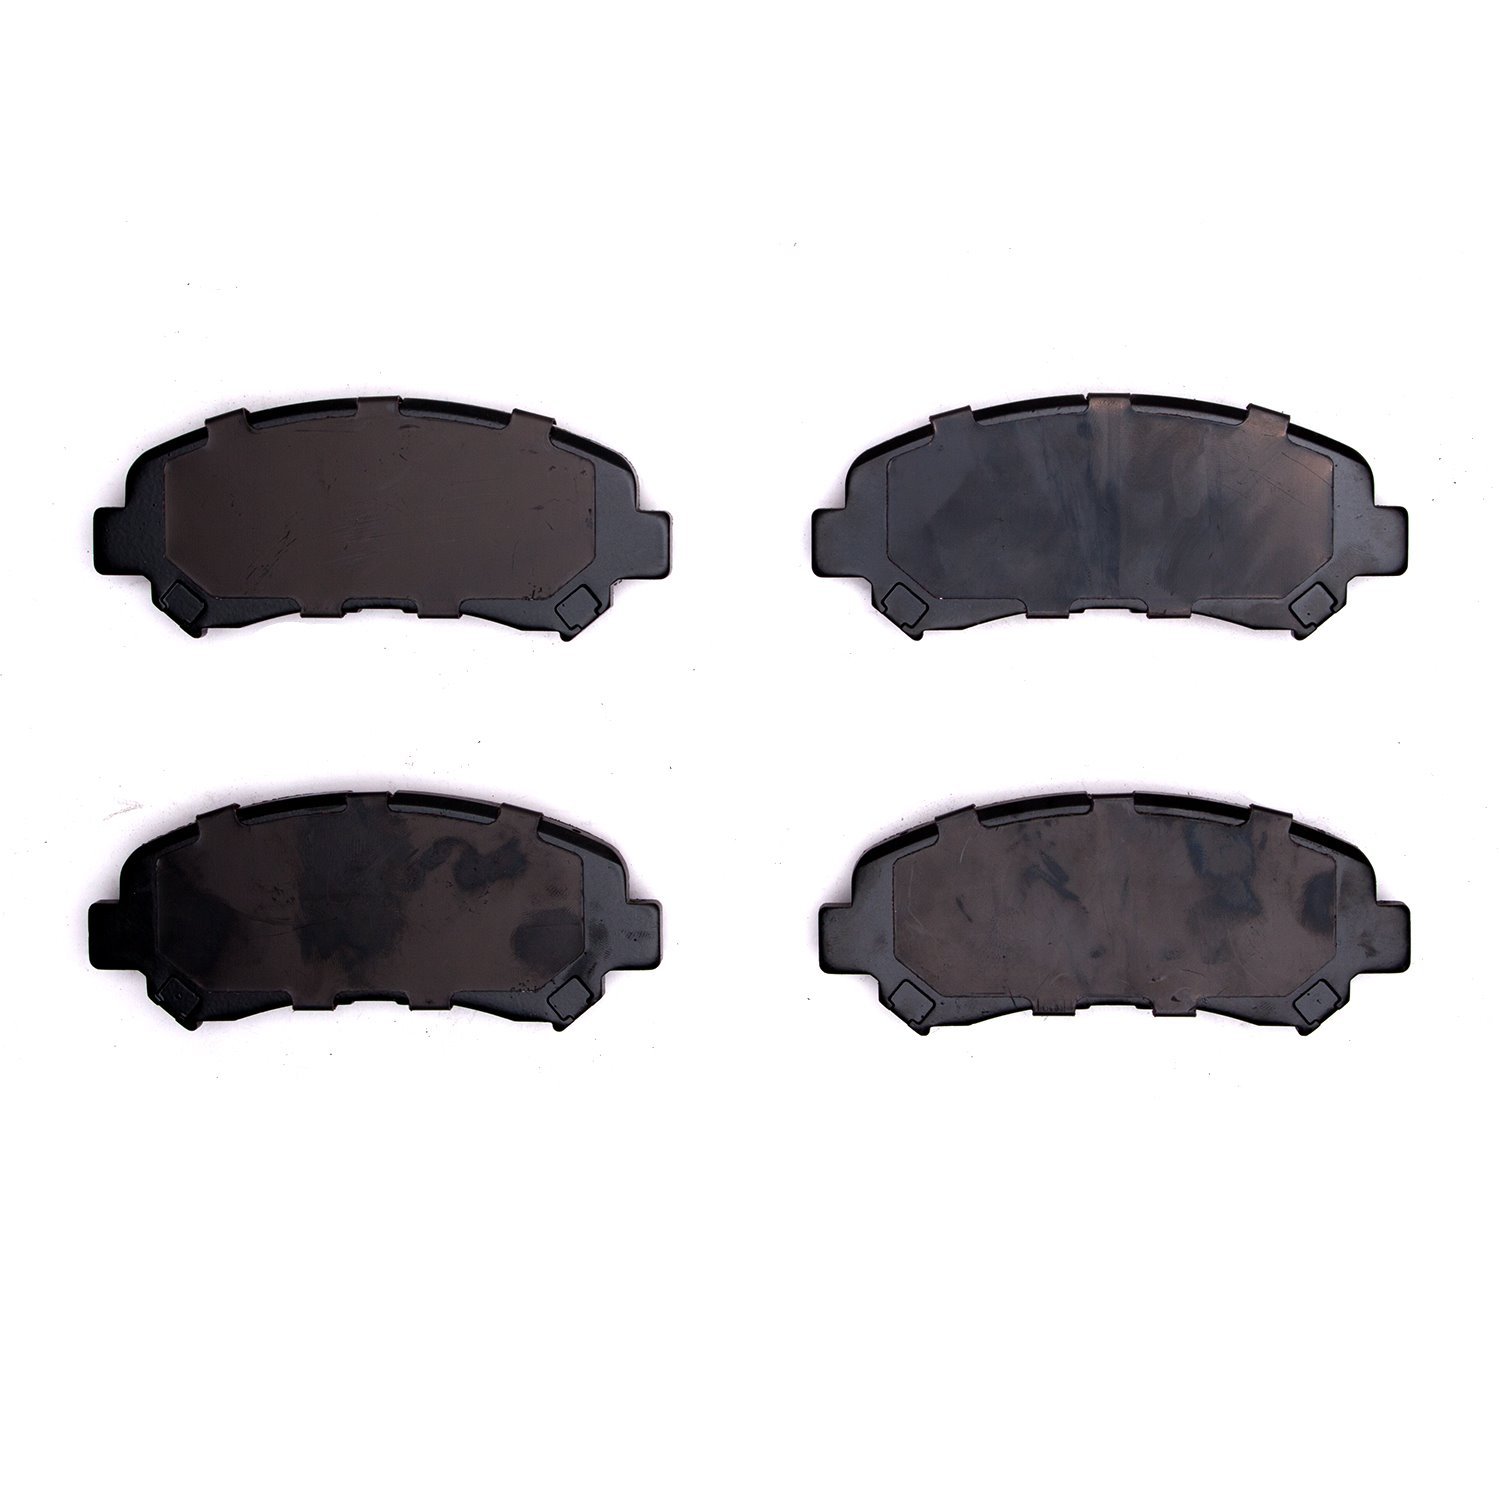 1310-1374-00 3000-Series Ceramic Brake Pads, Fits Select Multiple Makes/Models, Position: Front